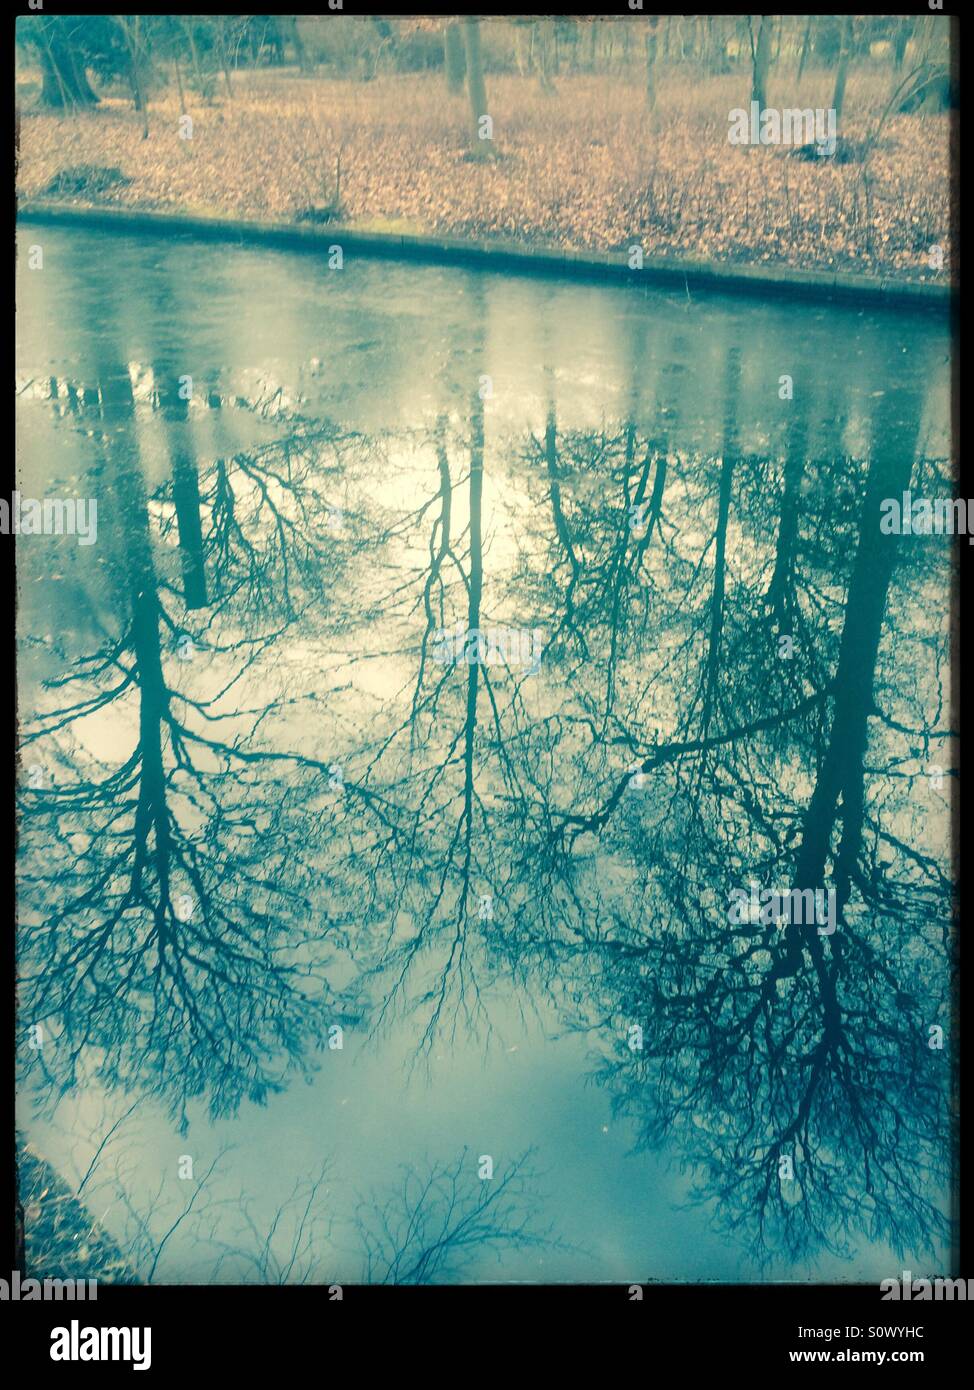 Reflections of trees in a lake. Stock Photo